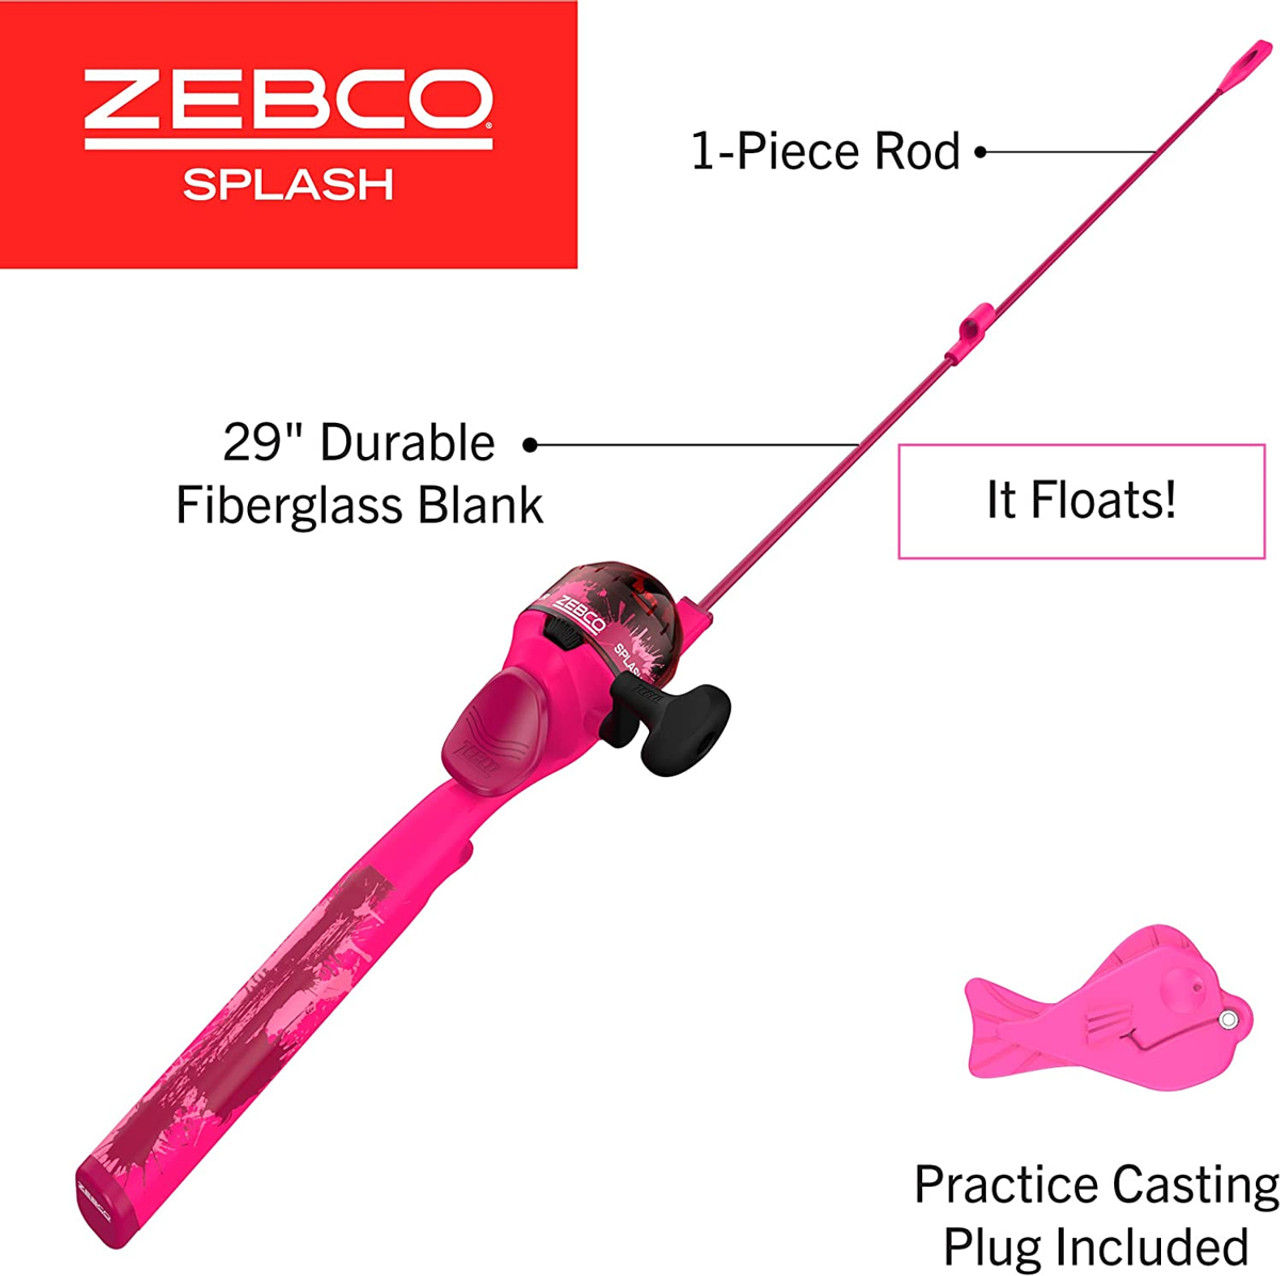 Zebco Splash Kids Spincast Reel and Fishing Rod Combo, 29 Durable Floating  Fiberglass Rod with Tangle-Free Design, Oversized Reel Handle Knob,  Pre-Spooled with 6-Pound Zebco Fishing Line